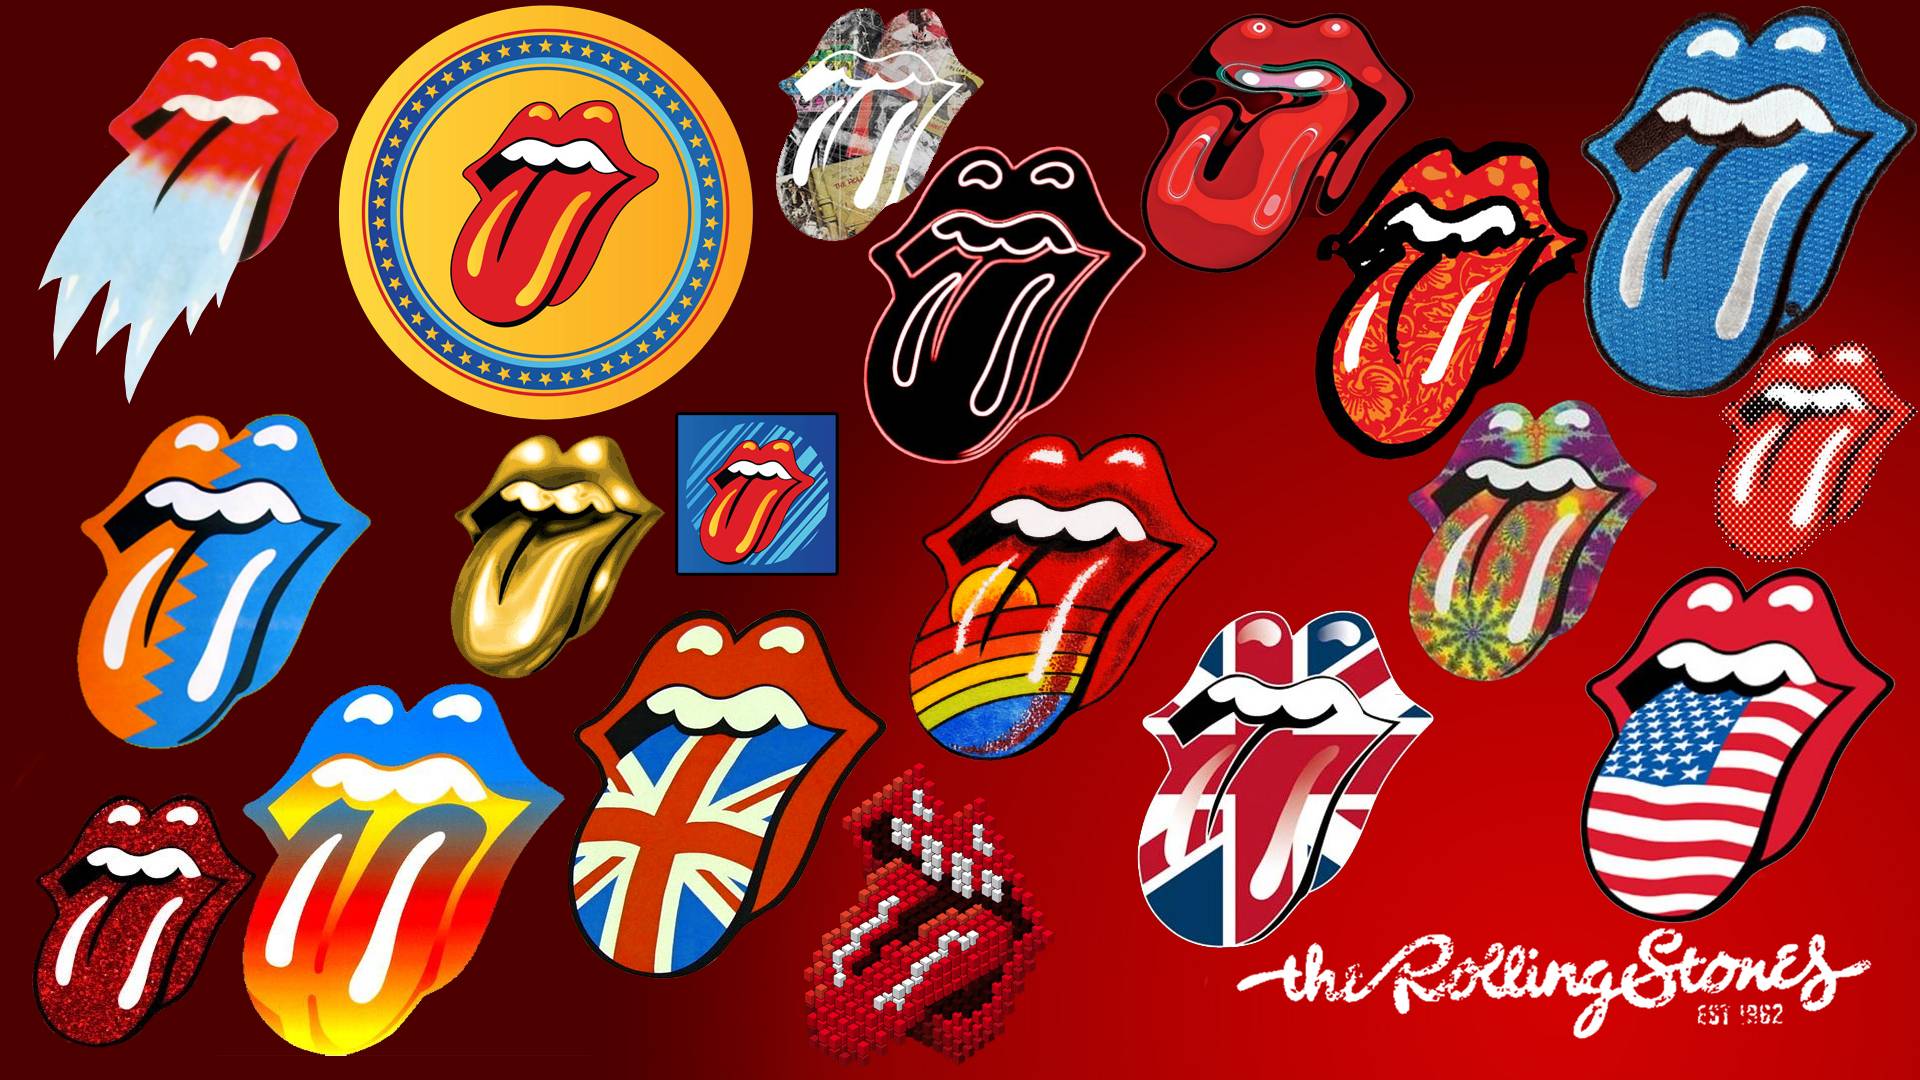 Wallpapers For The Rolling Stones Wallpapers Iphone.